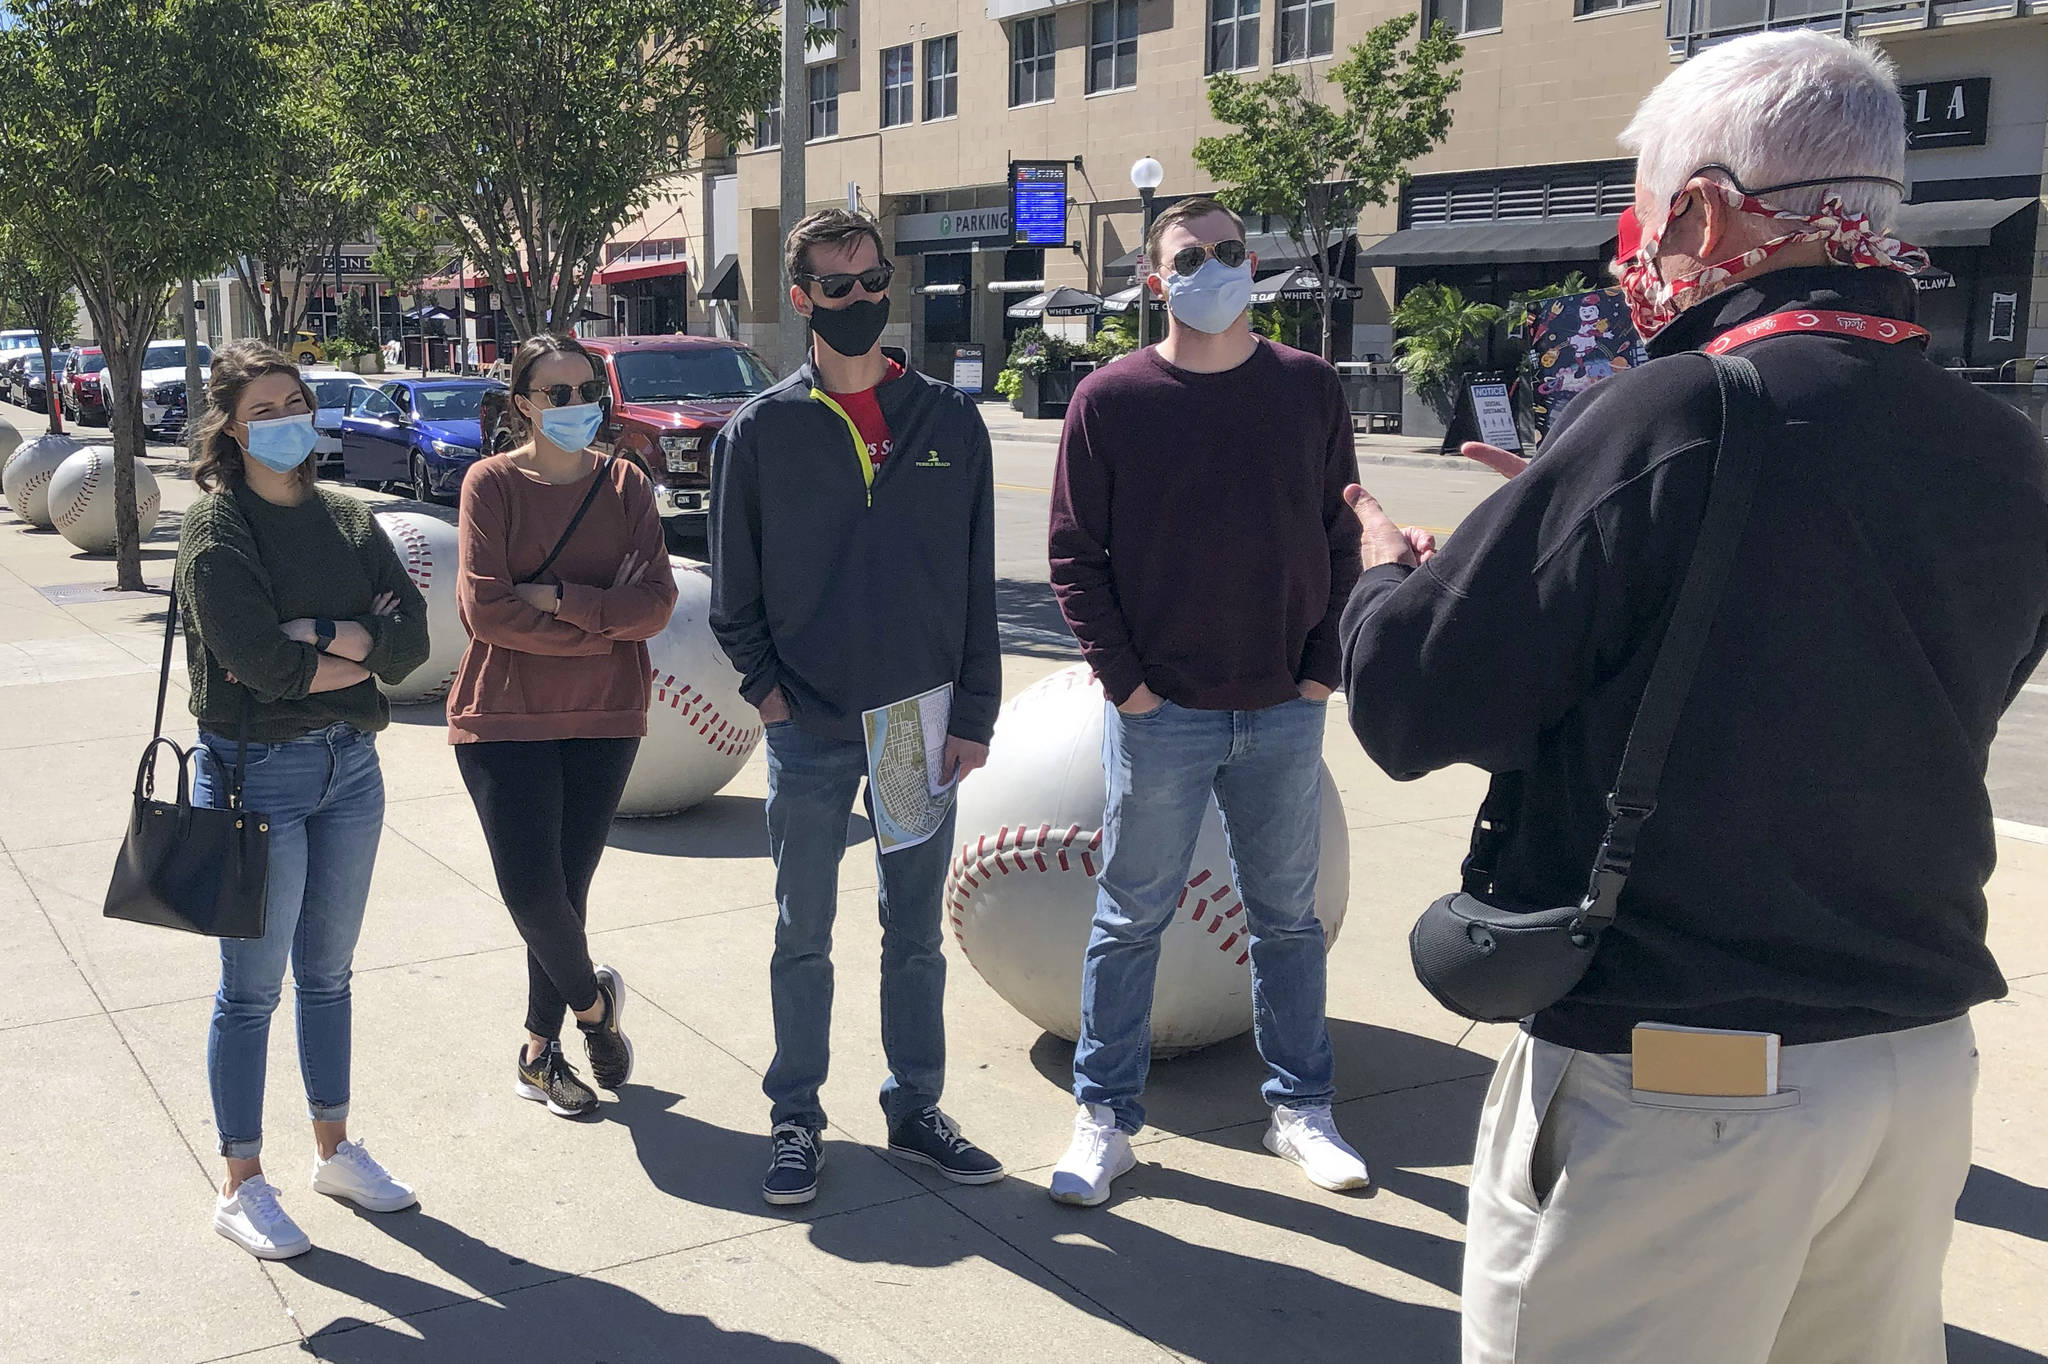 In this Sept. 20, 2020, photo, tour guide John Erardi, right, talks with a tour group on the sidewalk outside the Cincinnati Reds Great American Ball Park in Cincinnati. The walking tour was one of the few groups of people on the street as the Reds and White Sox were inside just an hour before the game without fans because of the pandemic. (AP Photo / Dan Sewell)